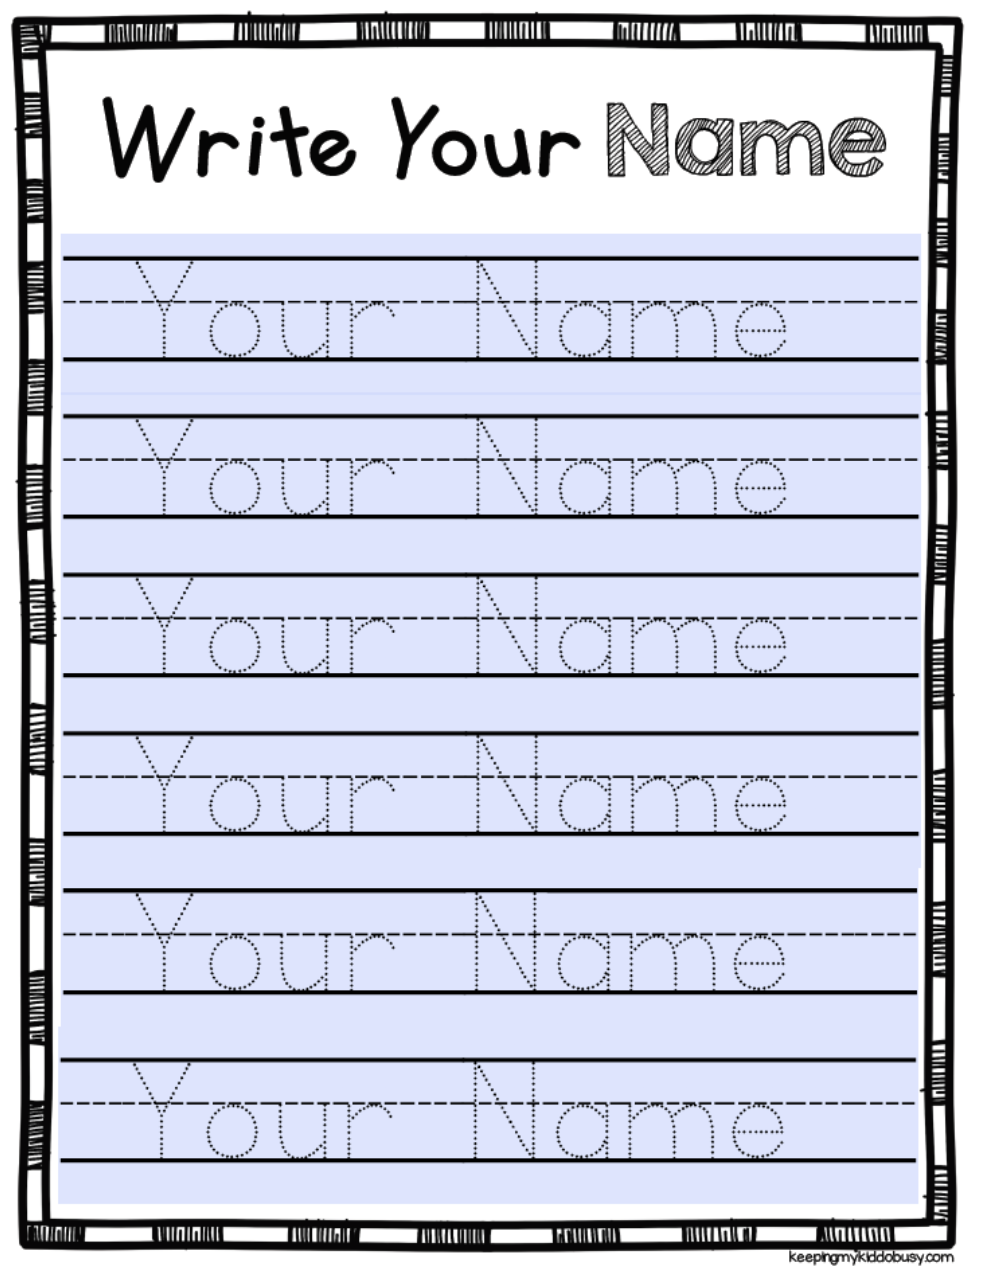 7-best-images-of-write-your-name-printable-free-printable-name-free